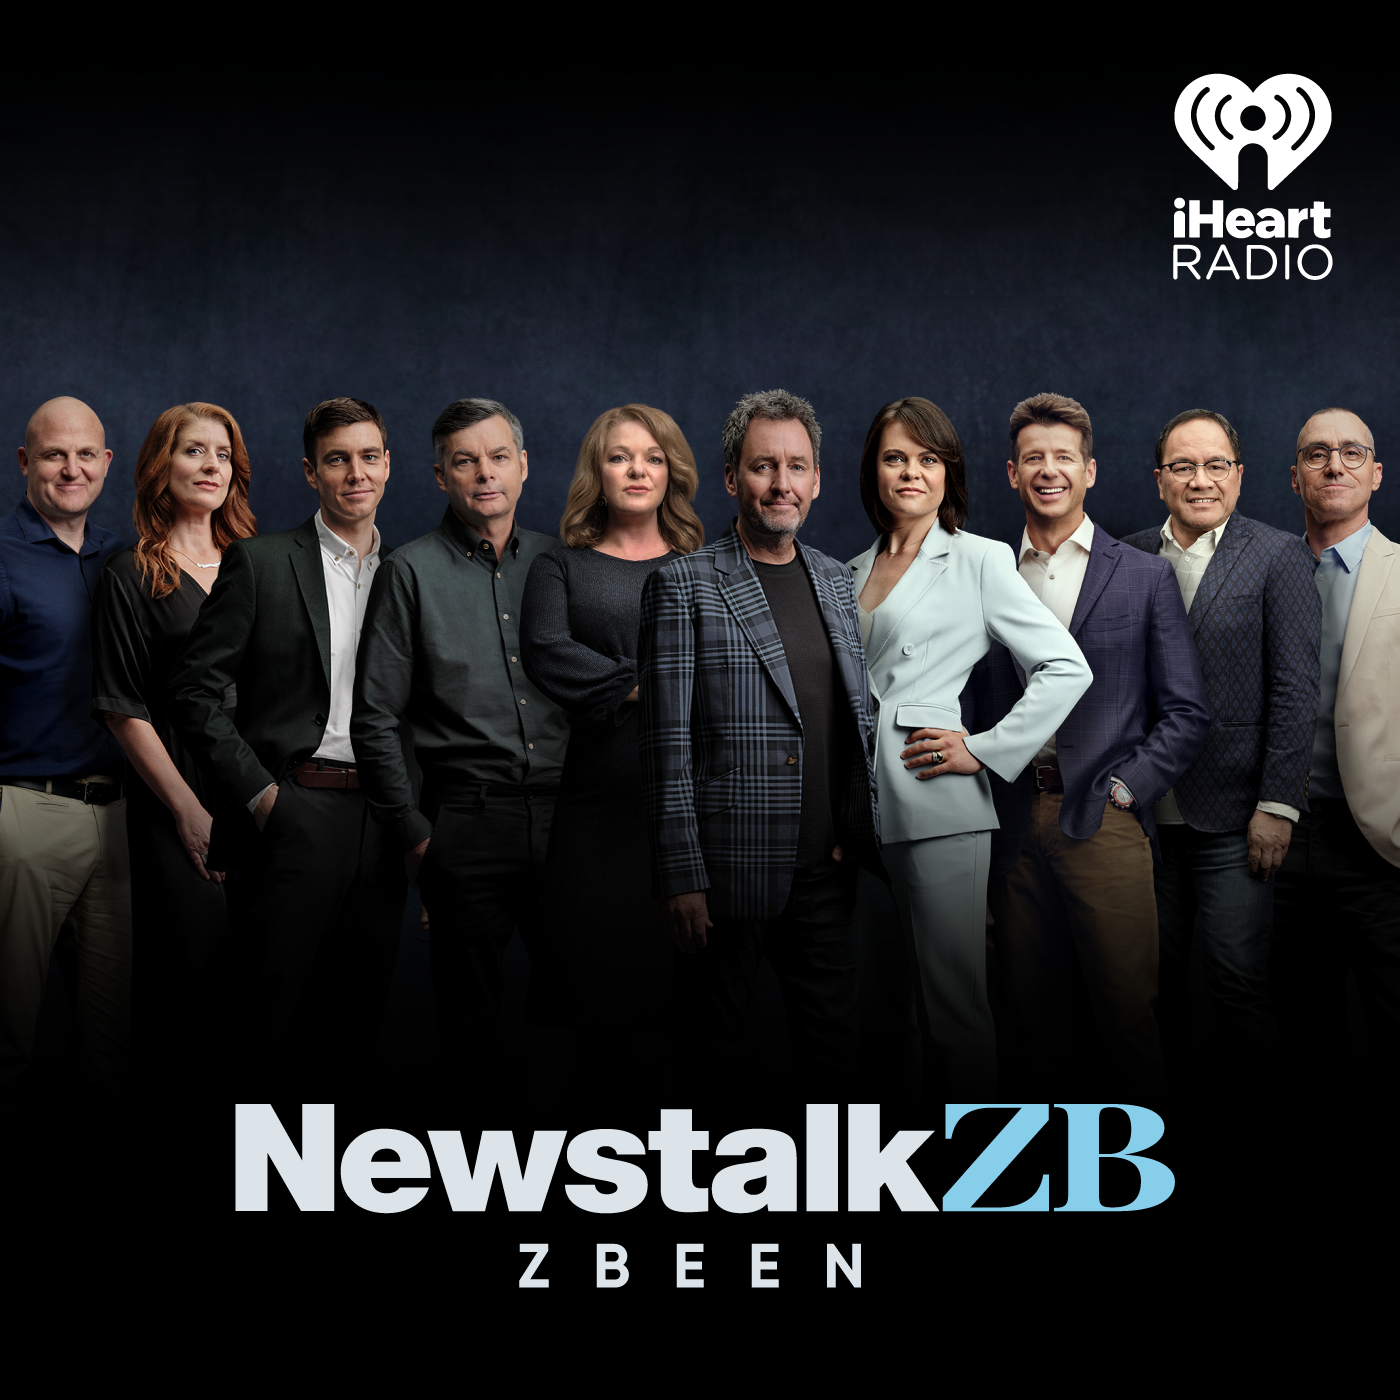 NEWSTALK ZBEEN: Are We Campaigning Or What?